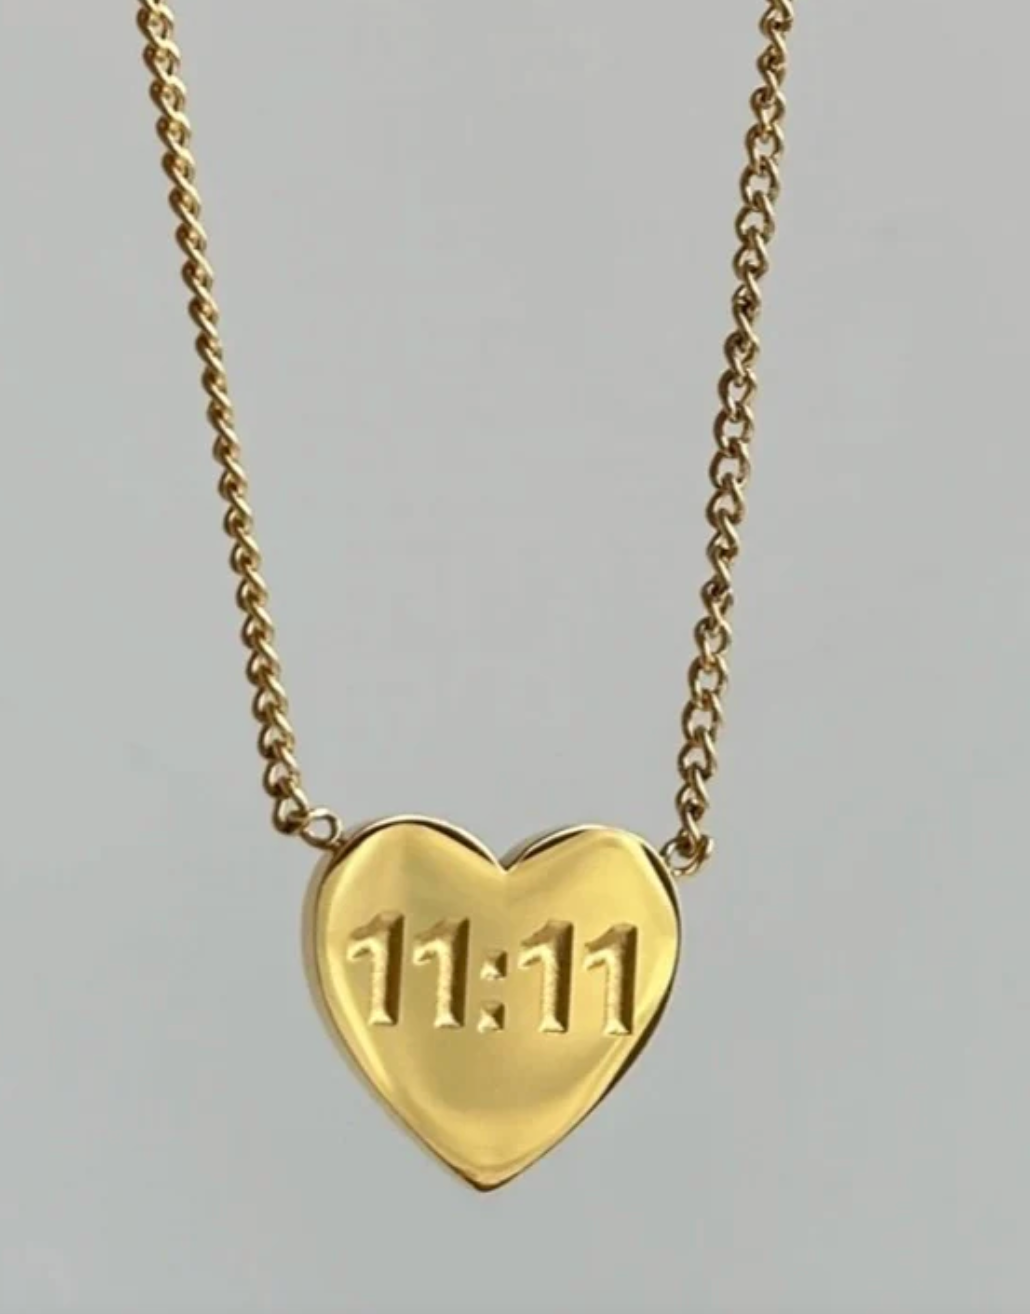 The 11:11 Necklace